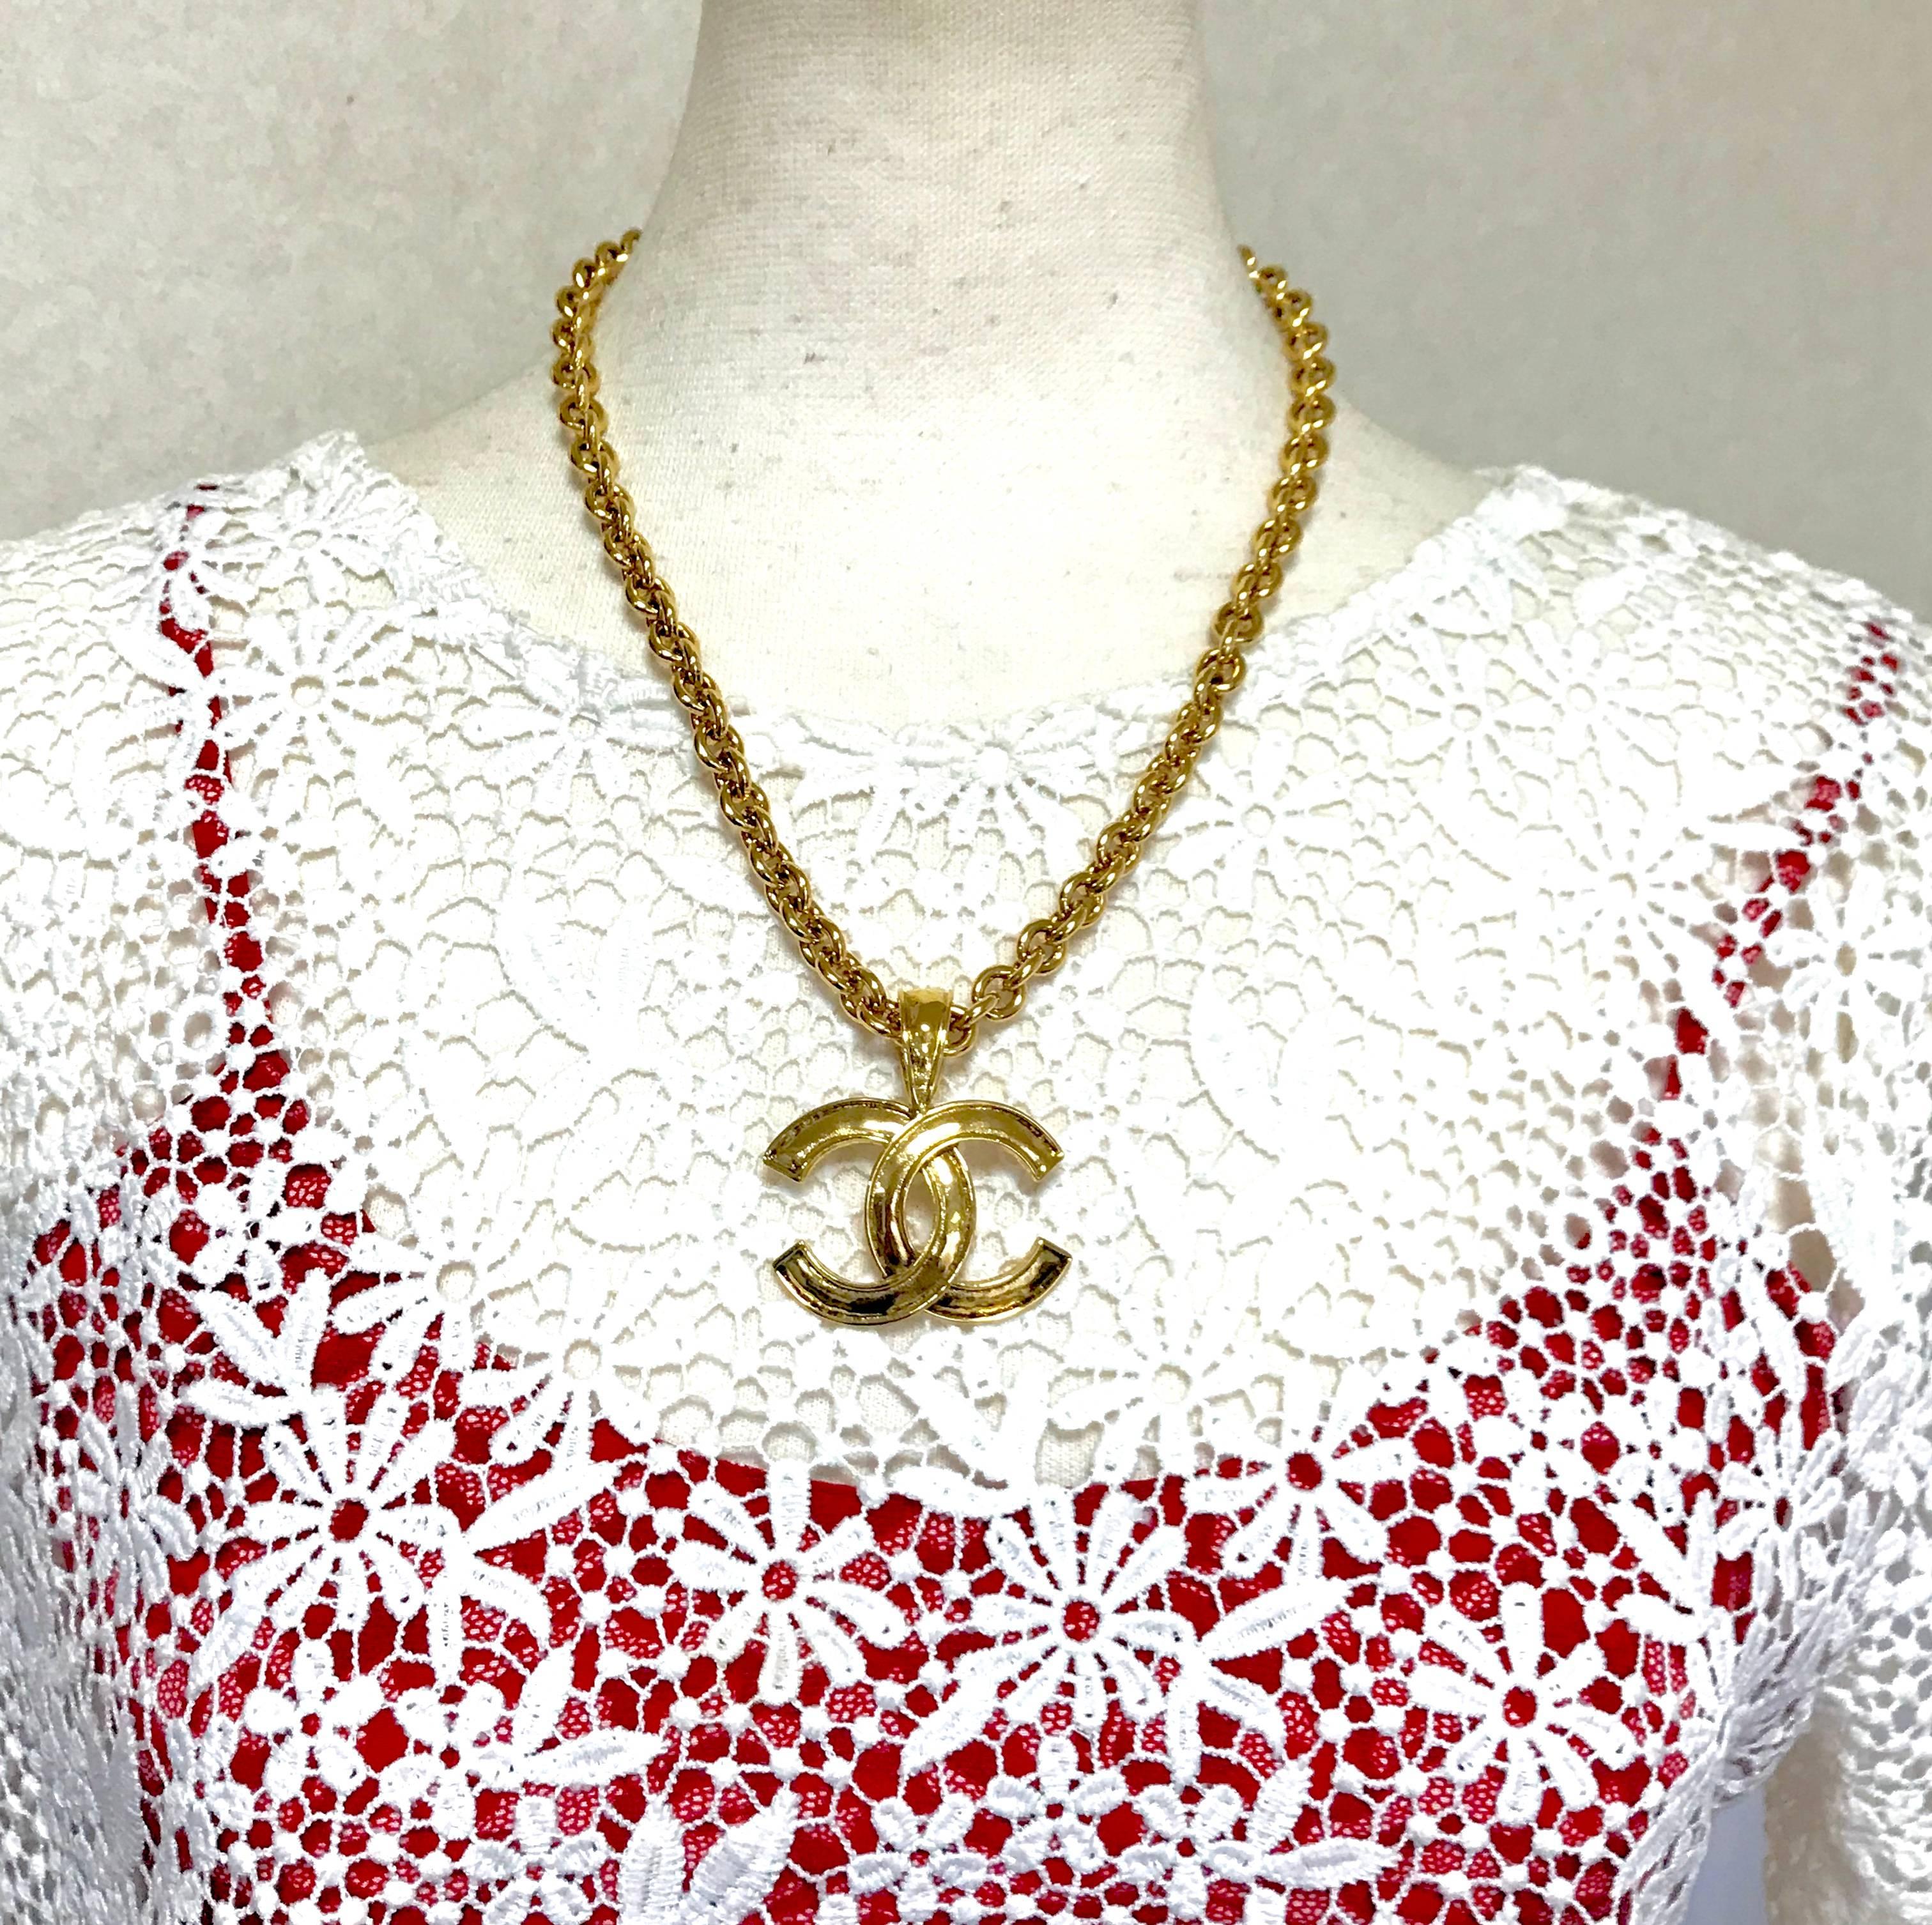 1990s. MINT. Vintage CHANEL golden chain necklace with large CC mark logo pendant top. Gorgeous jewelry. Best gift idea.

MINT/excellent vintage condition! Gorgeous and classic jewelry piece from Chanel back in the 90's....
Great gift idea.